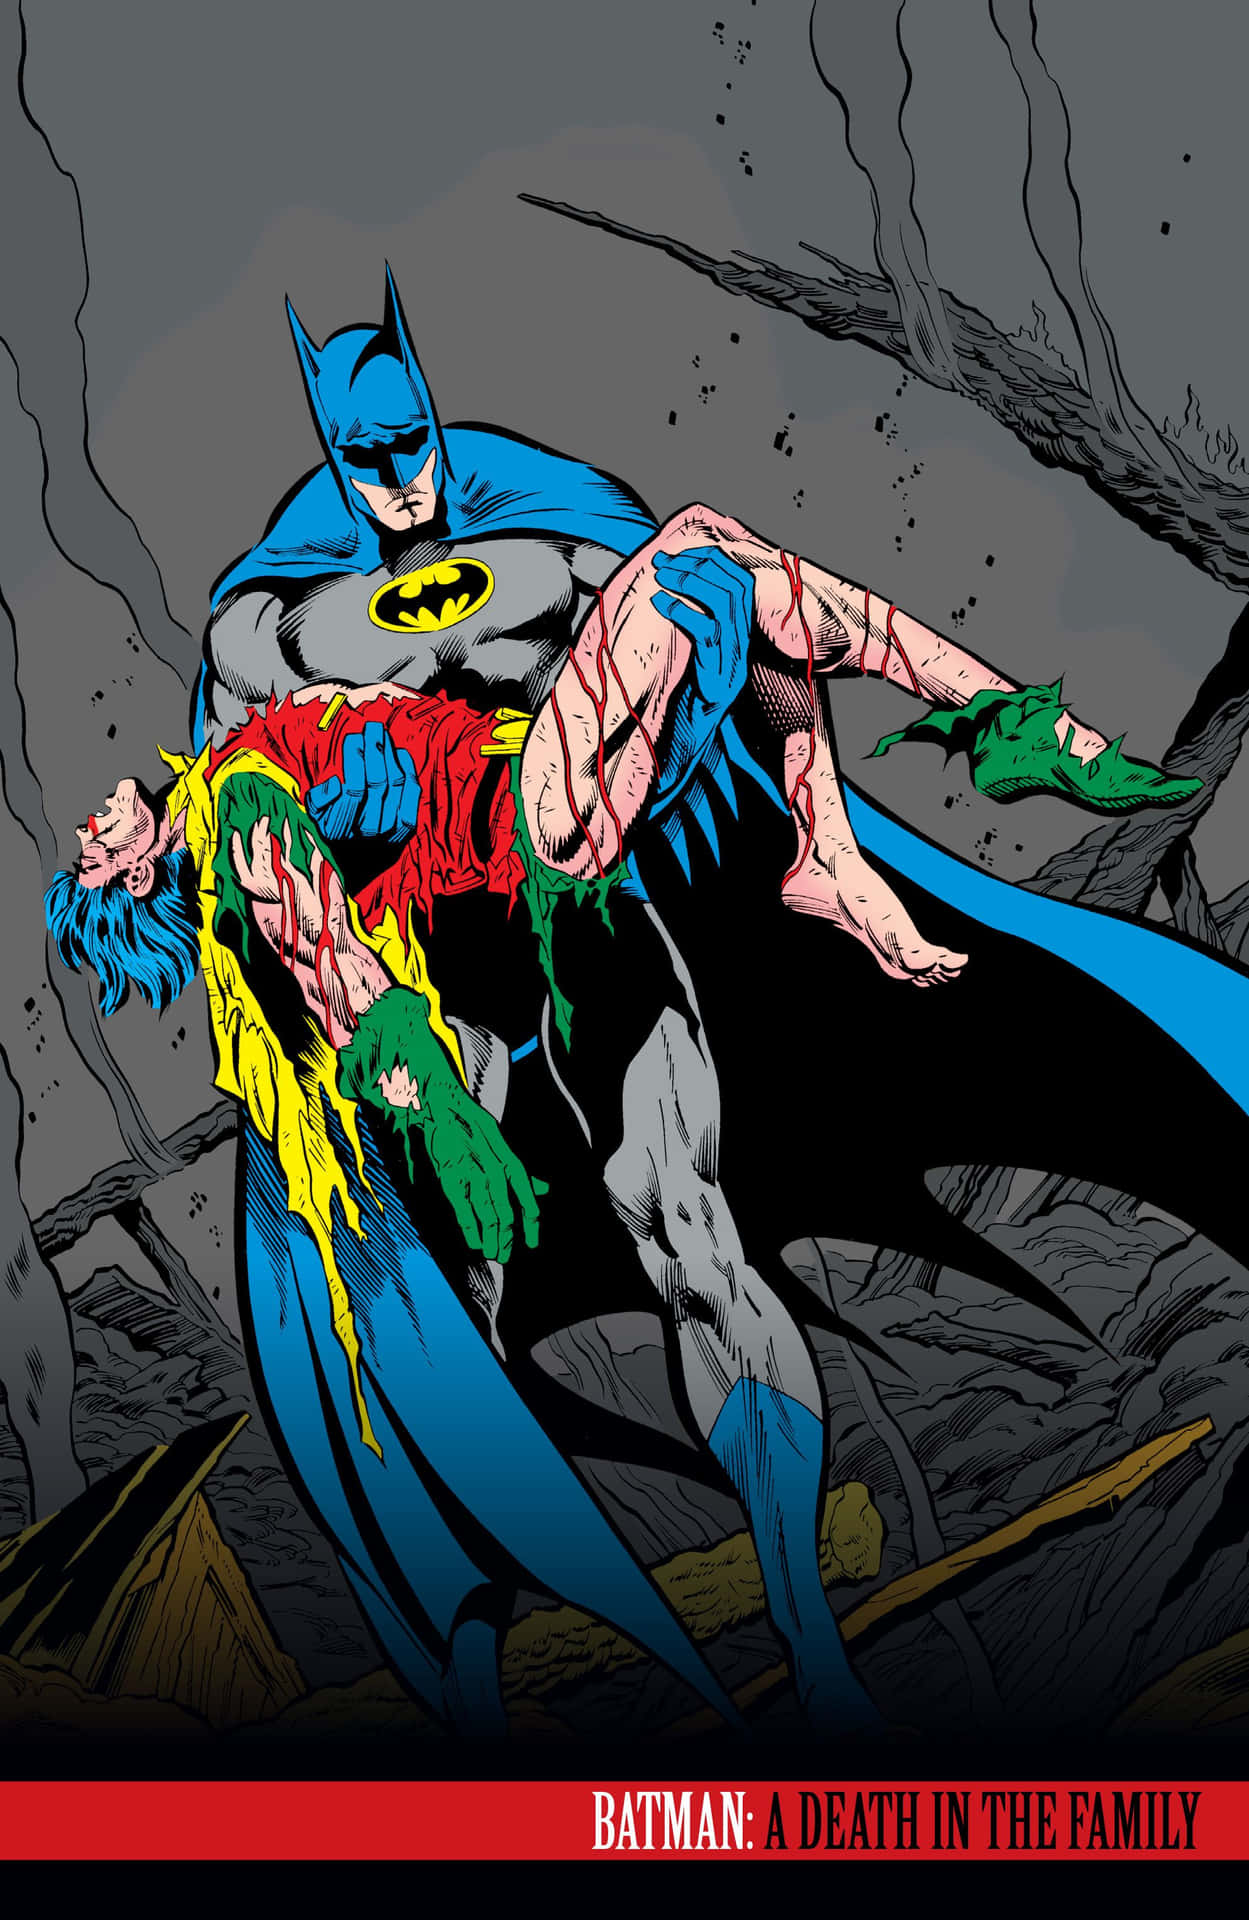 Batman mourning the loss of Robin in 'Batman: A Death in the Family' Wallpaper